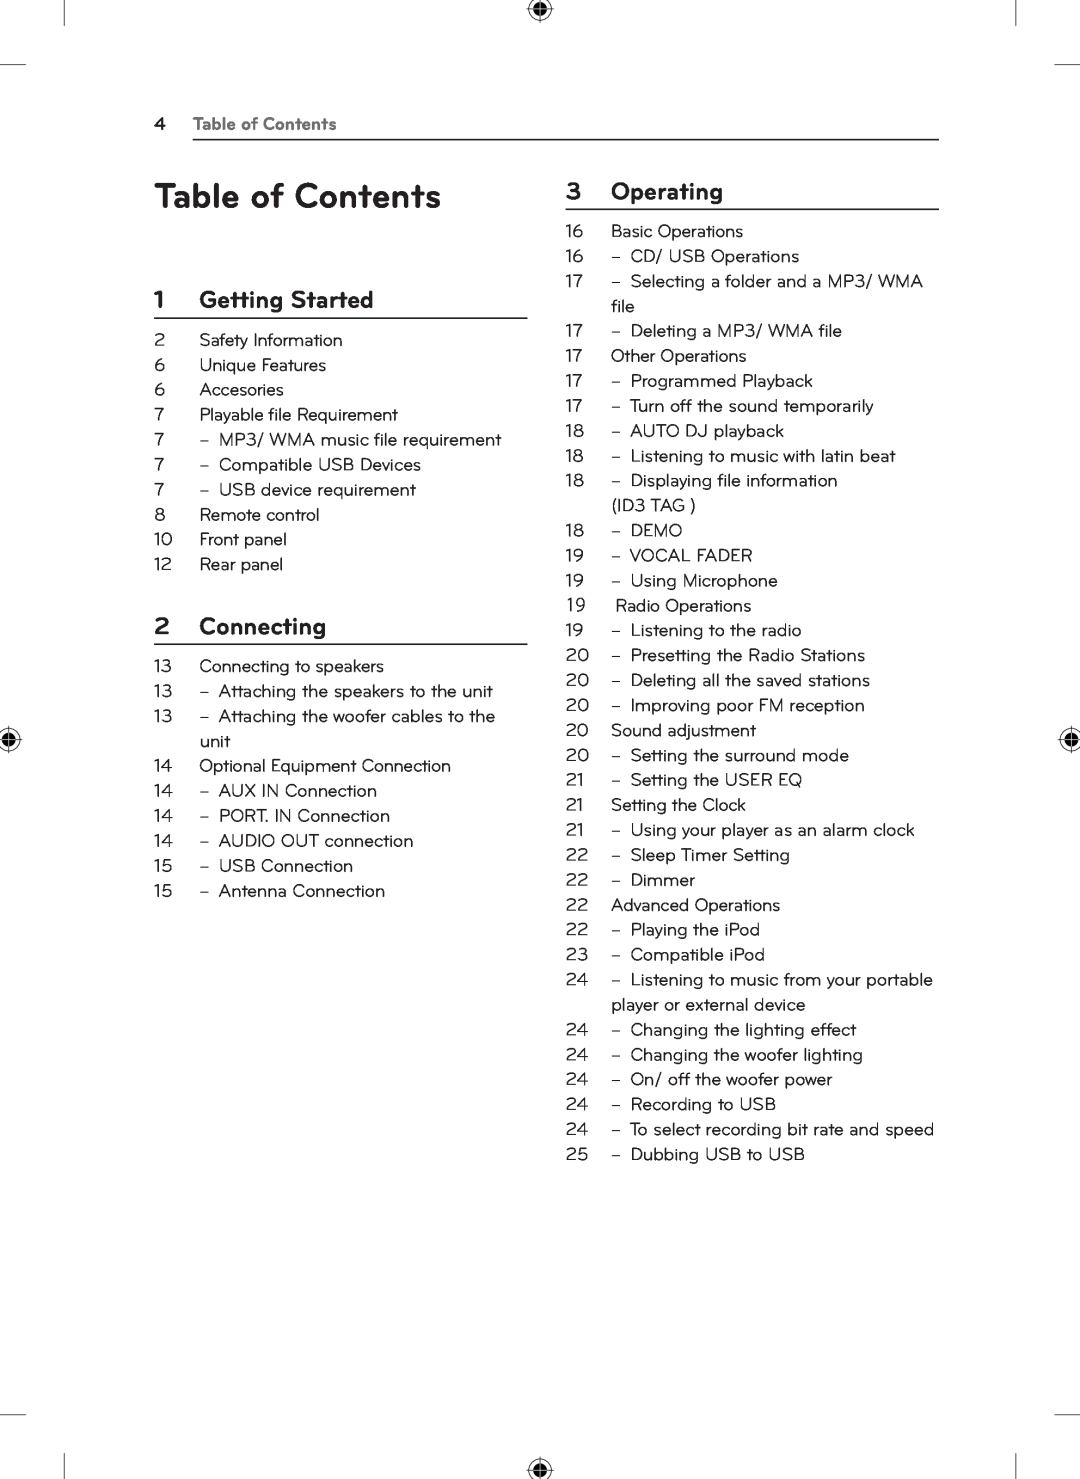 LG Electronics KSM1506 owner manual 1Getting Started, Connecting, Operating, 4Table of Contents 